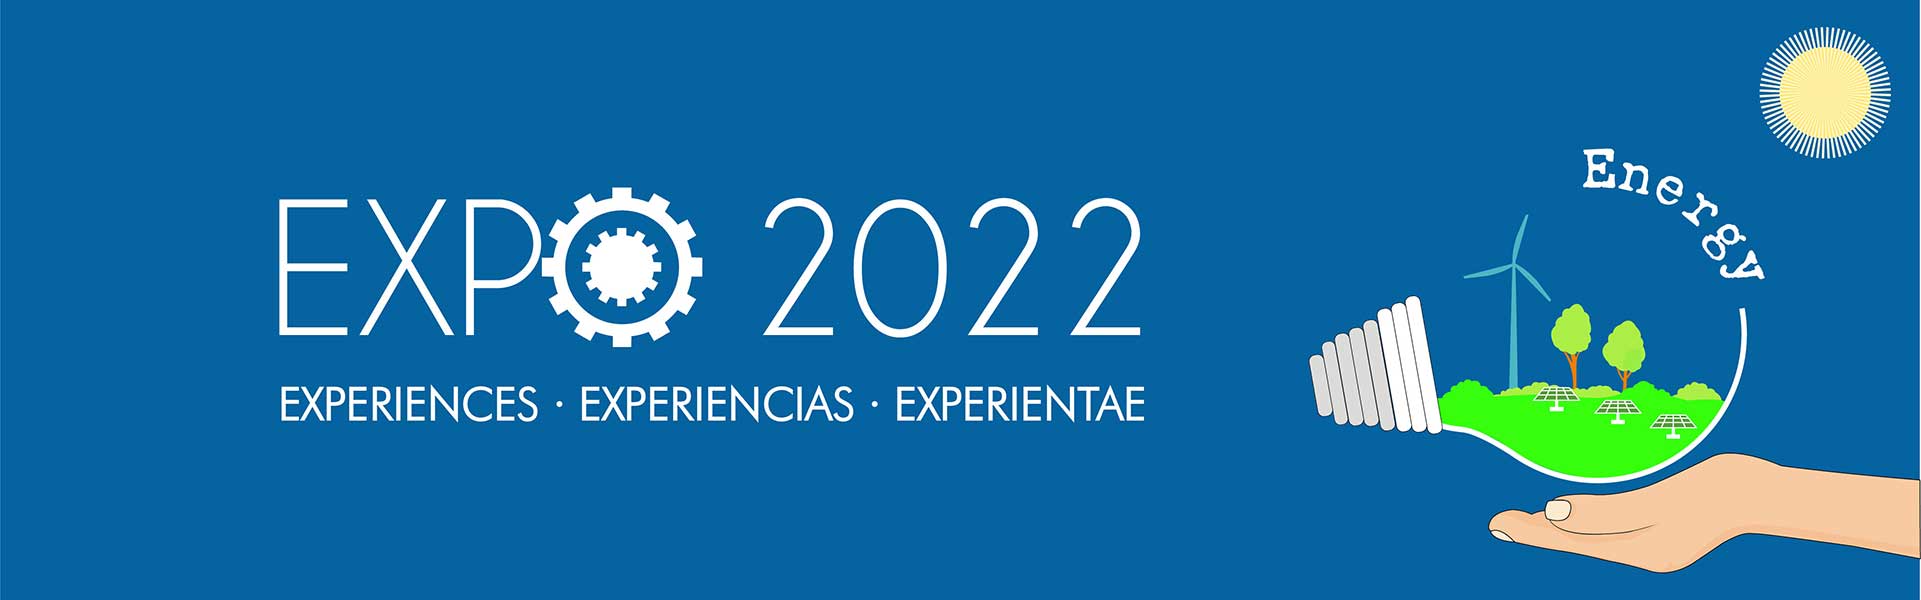 Banner-Expo-2022-1920×600